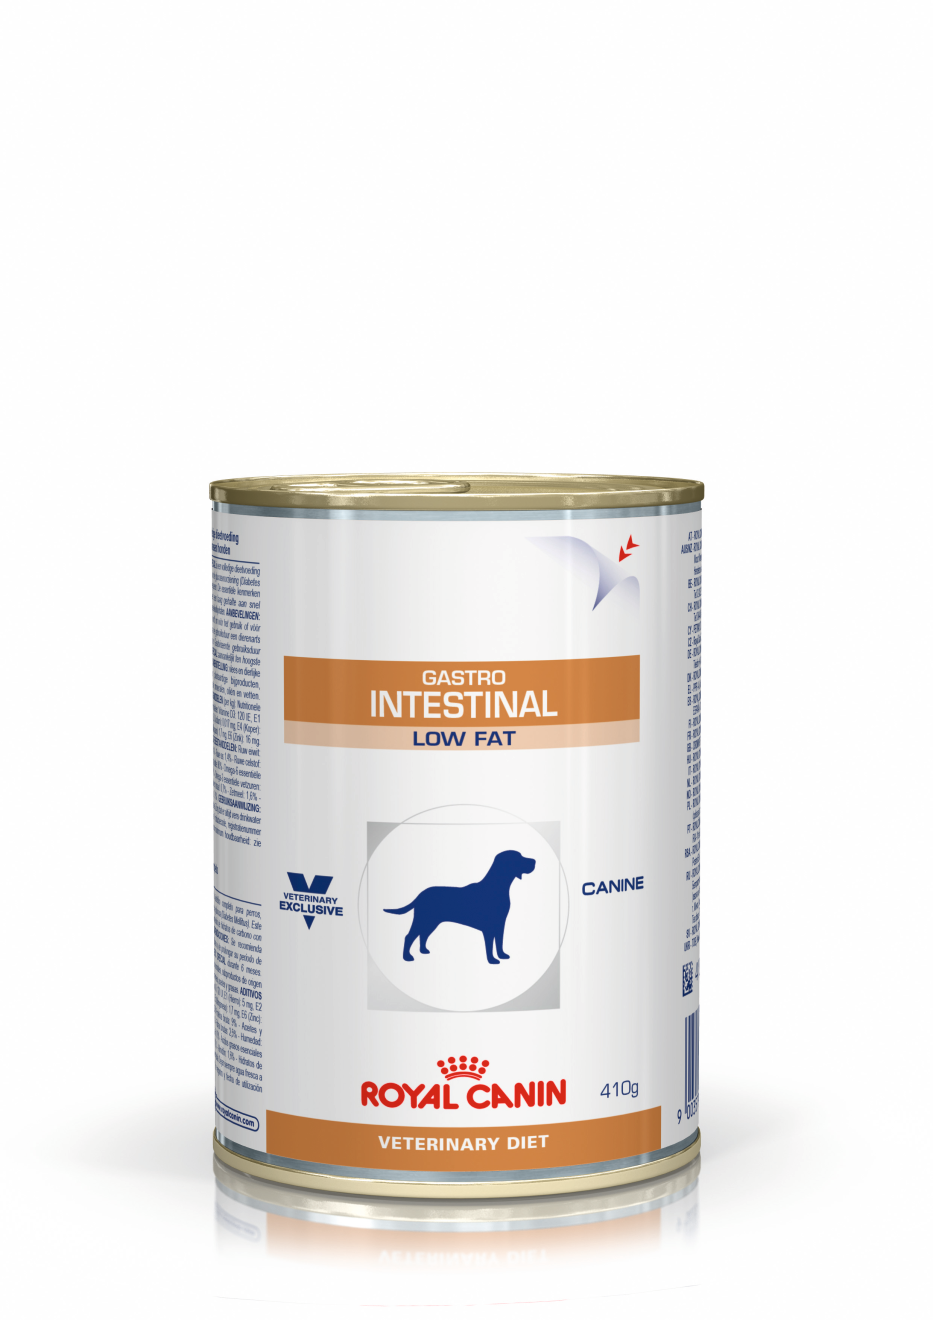 royal canin gastrointestinal low fat wet food